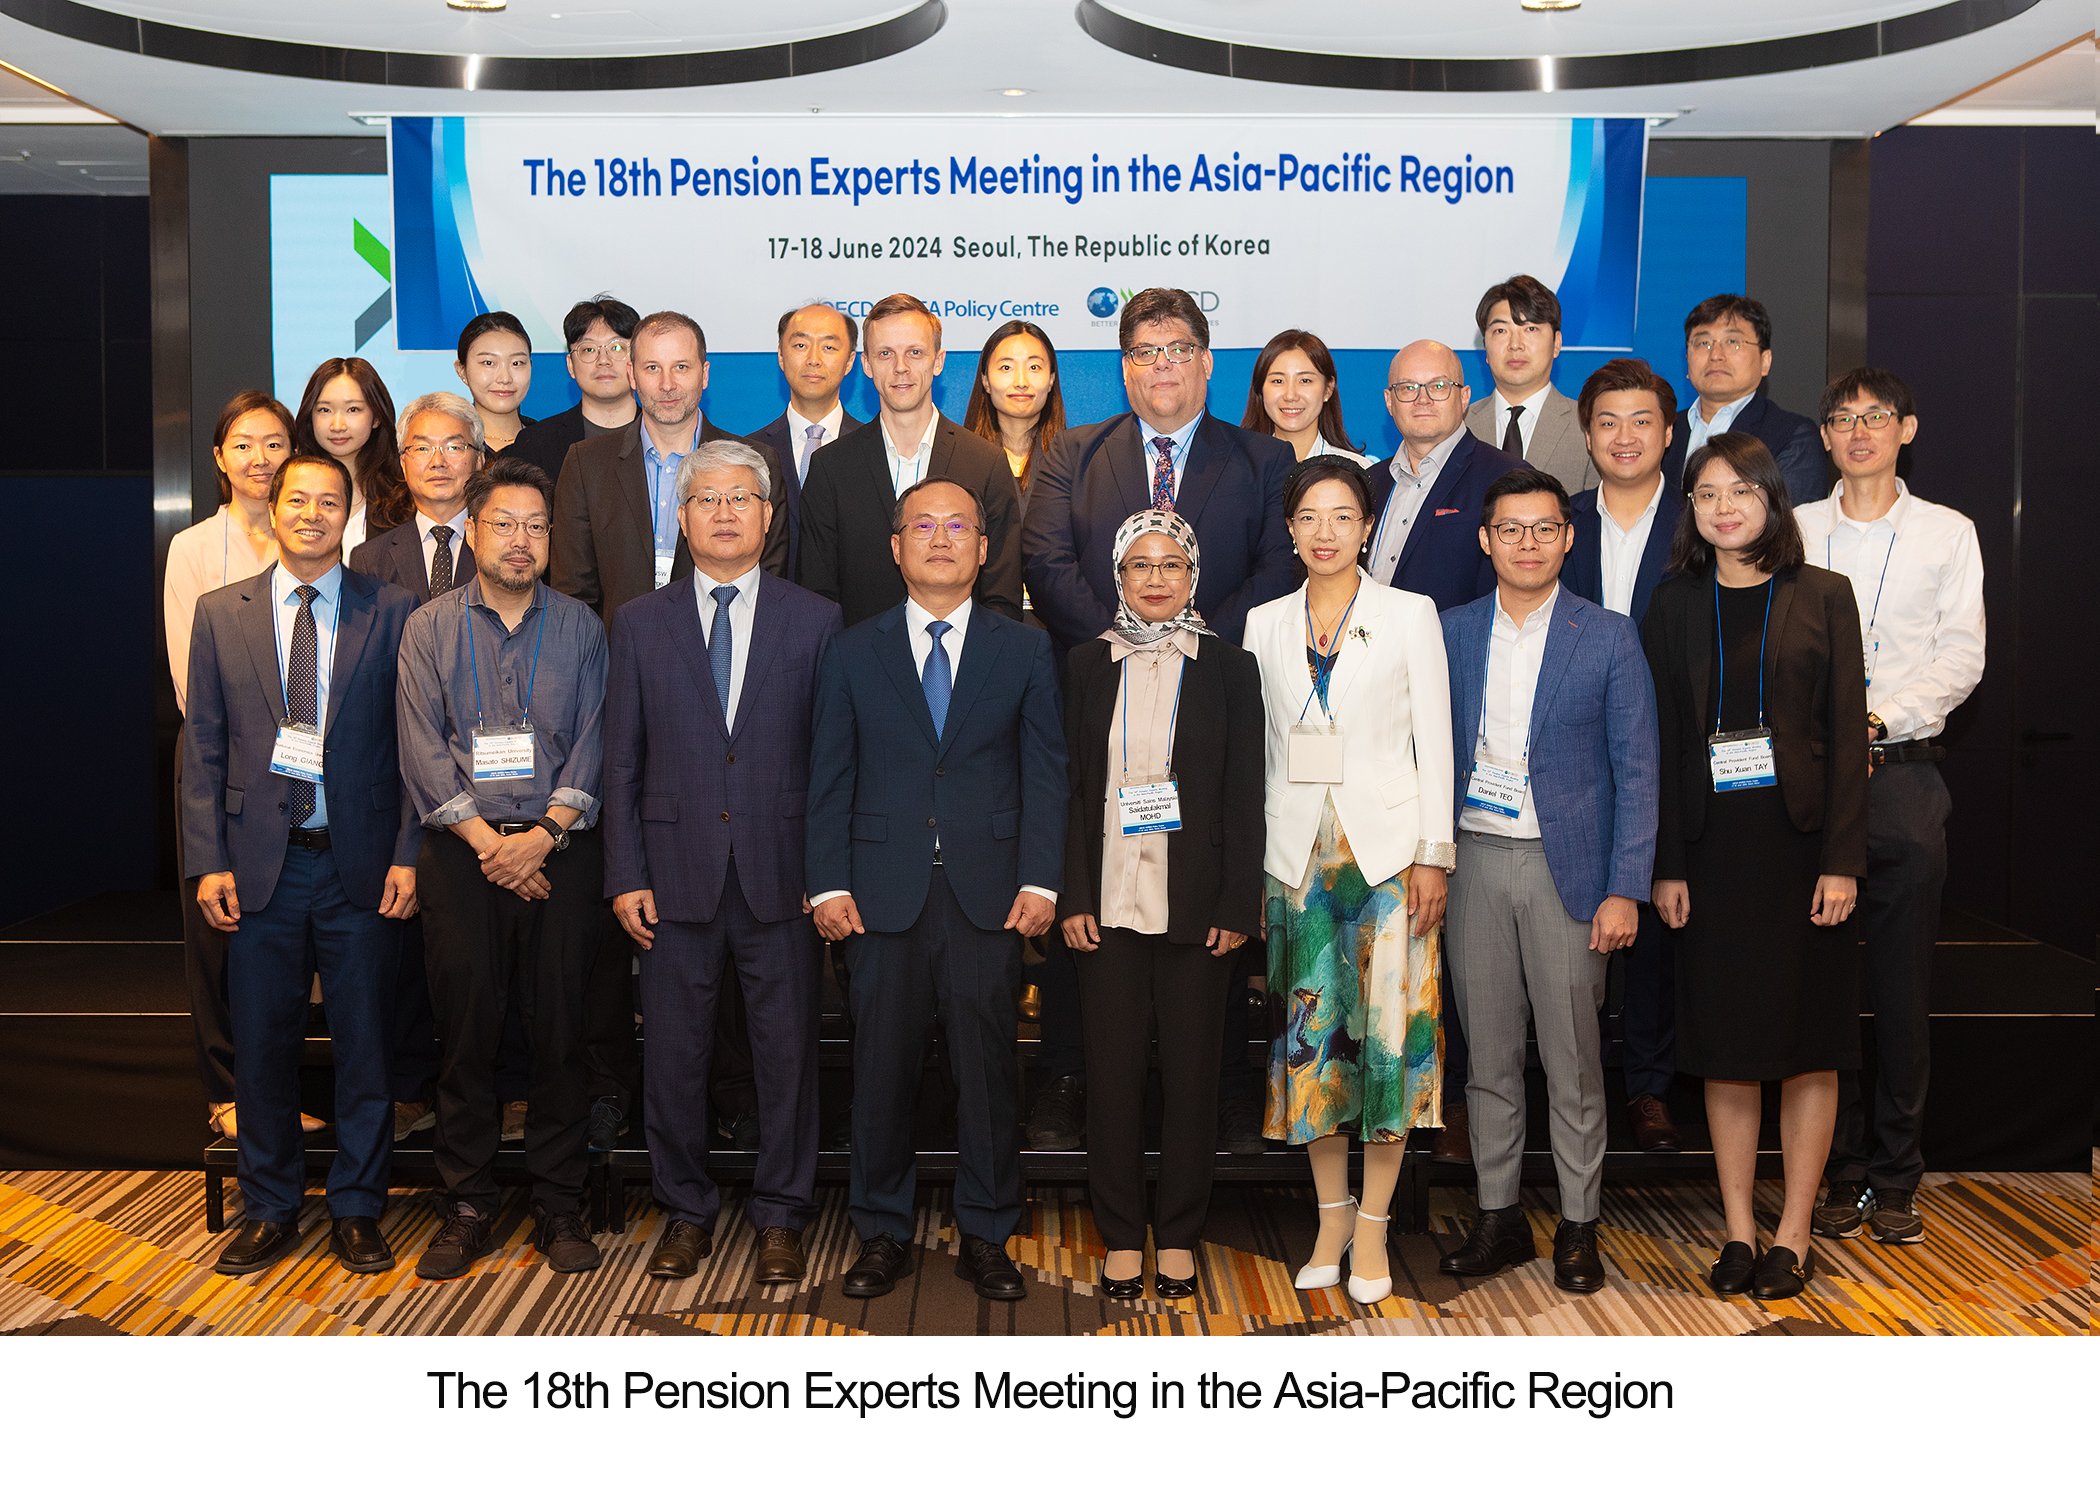 The 18th Pension Experts Meeting in the Asia-Pacific Region